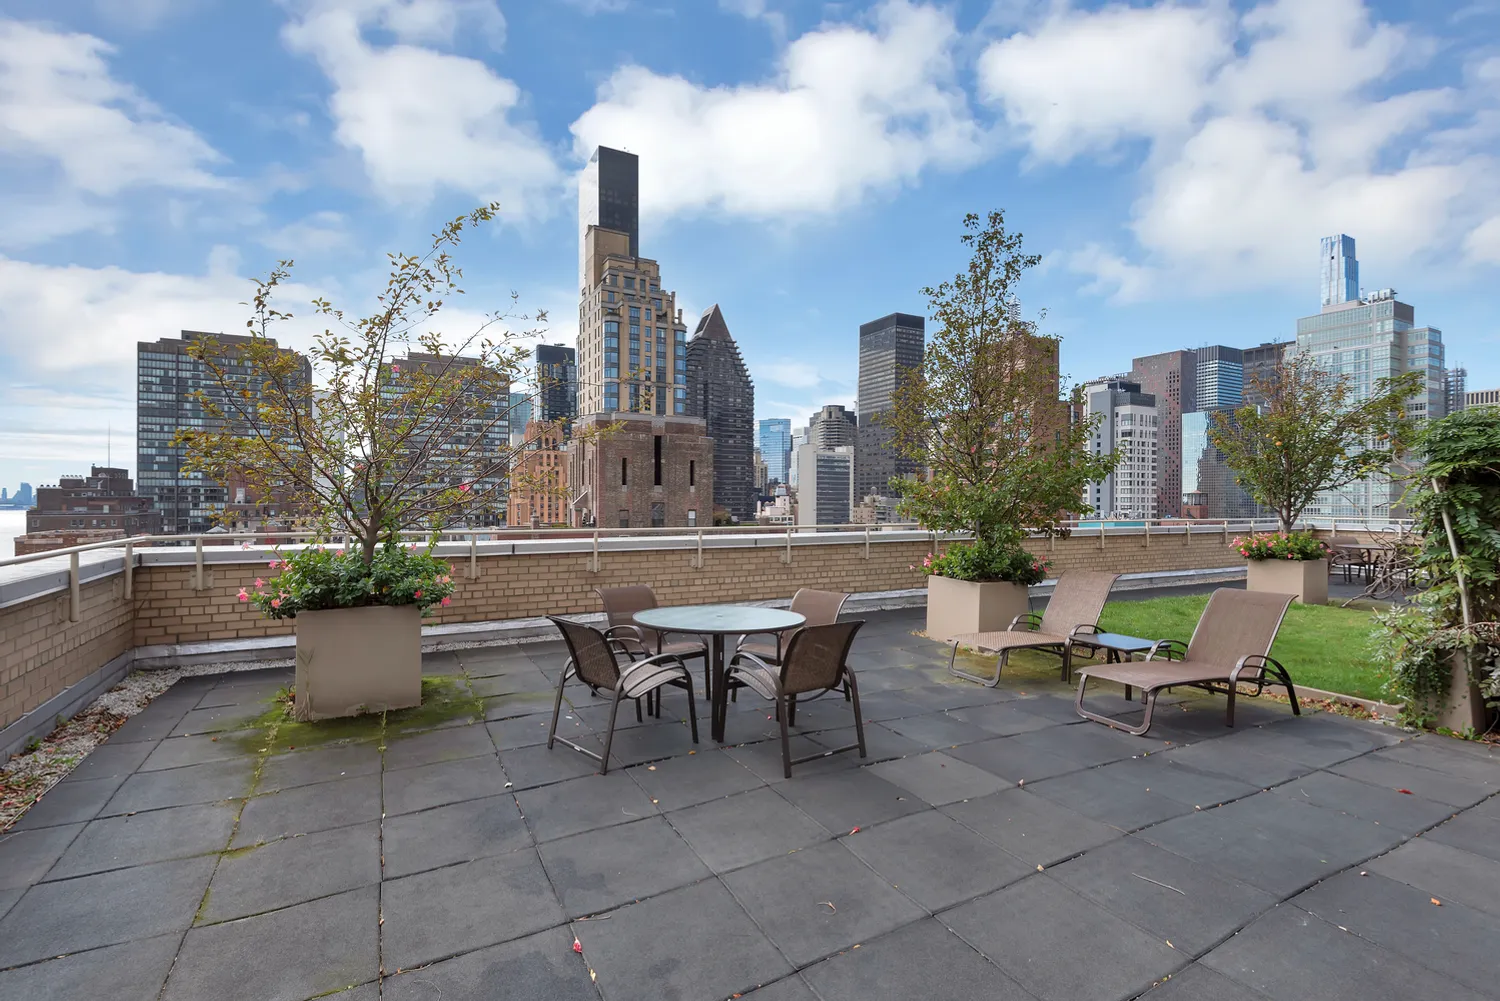 Roofdeck of 415 East 52nd Street